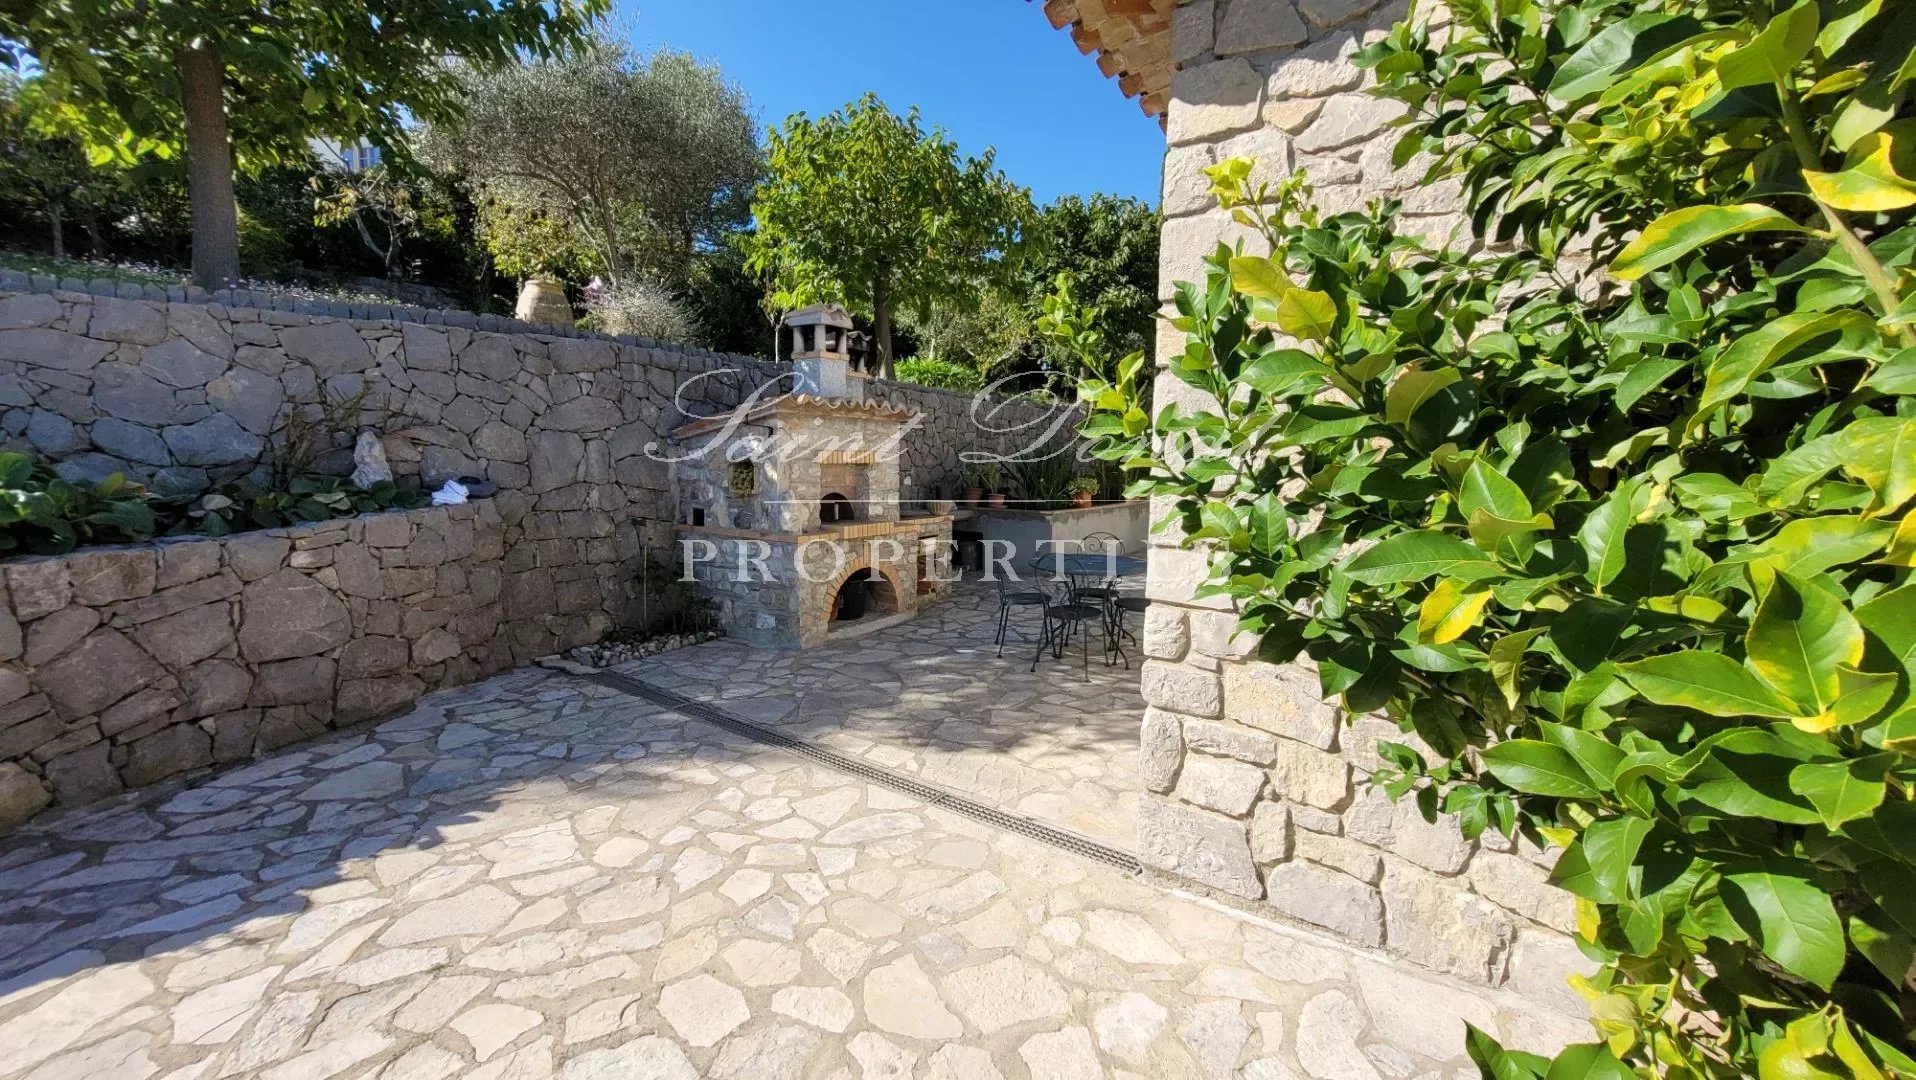 Magnificent renovated single-storey Provencal stonehouse